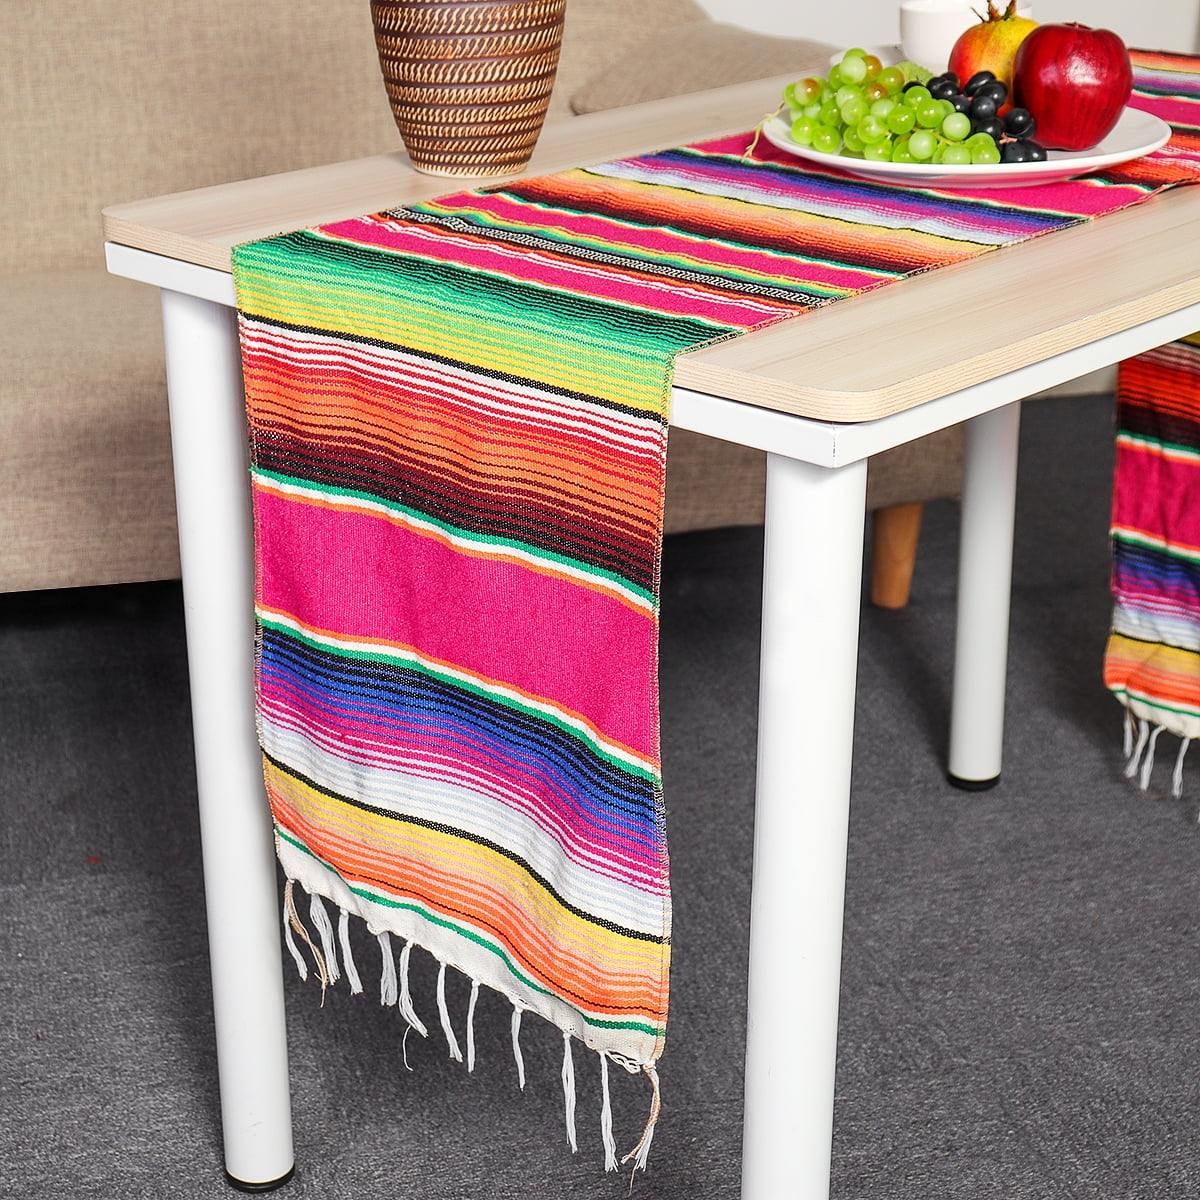 Mexican Serape Table Runner Tablecloth Blanket Car Seat Cover Party Home Decor